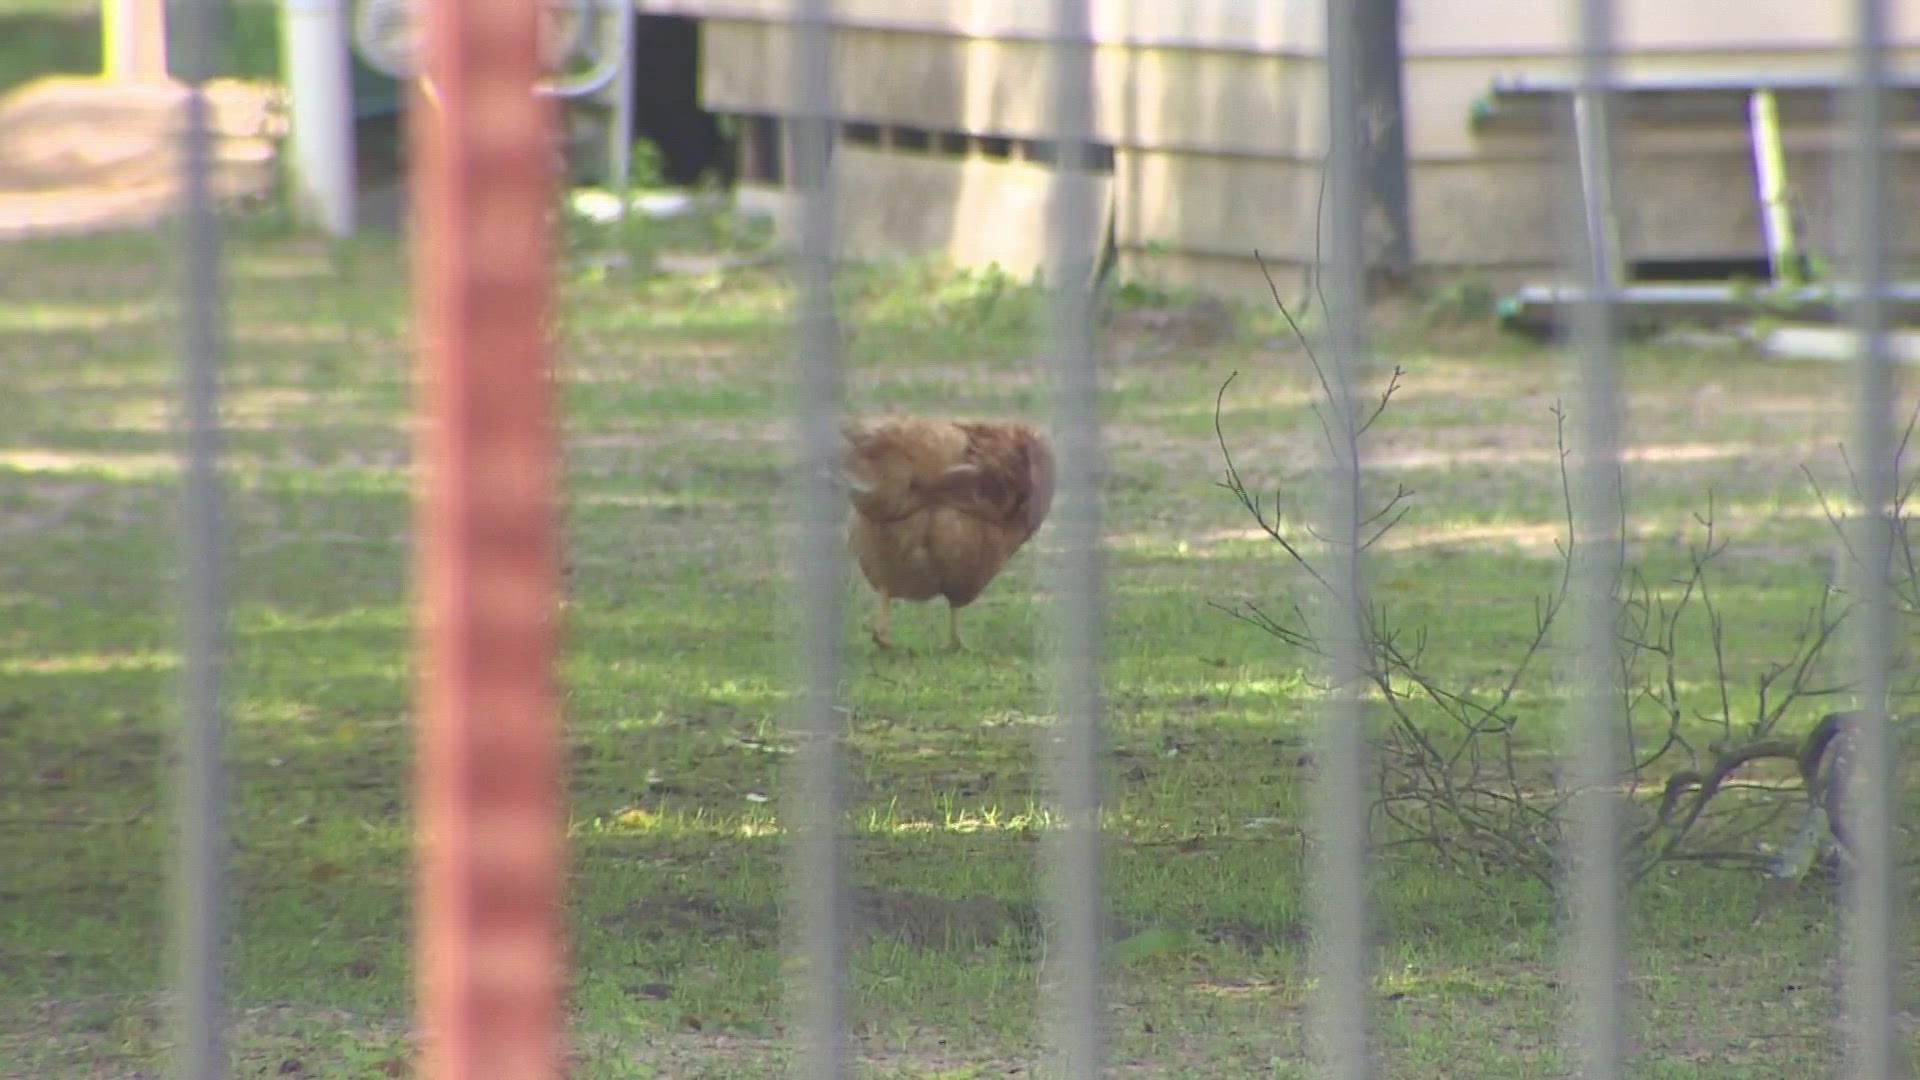 They say the dog got into Francisco Oropeza's yard a few times and killed his chickens so he shot and killed the dog.